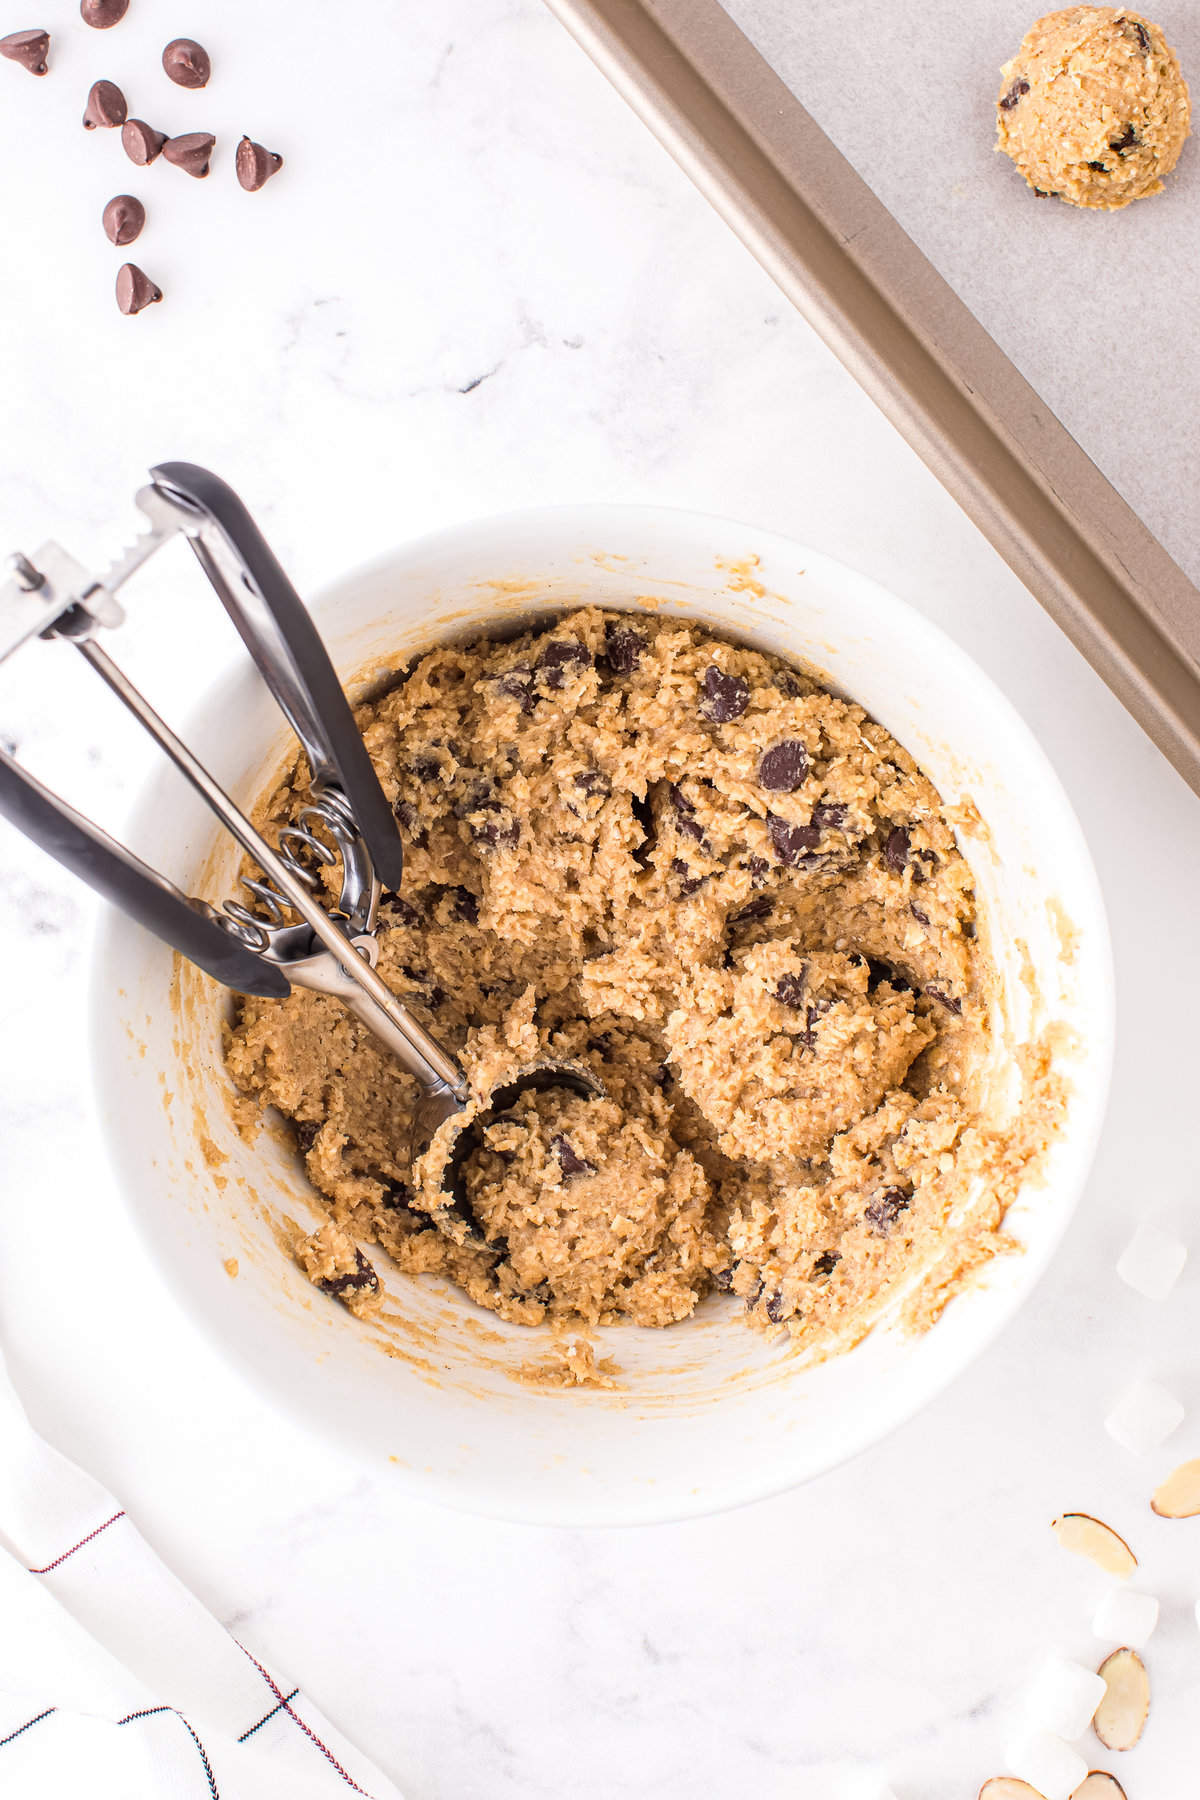 Fold in chocolate chips and use a 2 inch cookie scoop to place batter onto a cookie sheet.